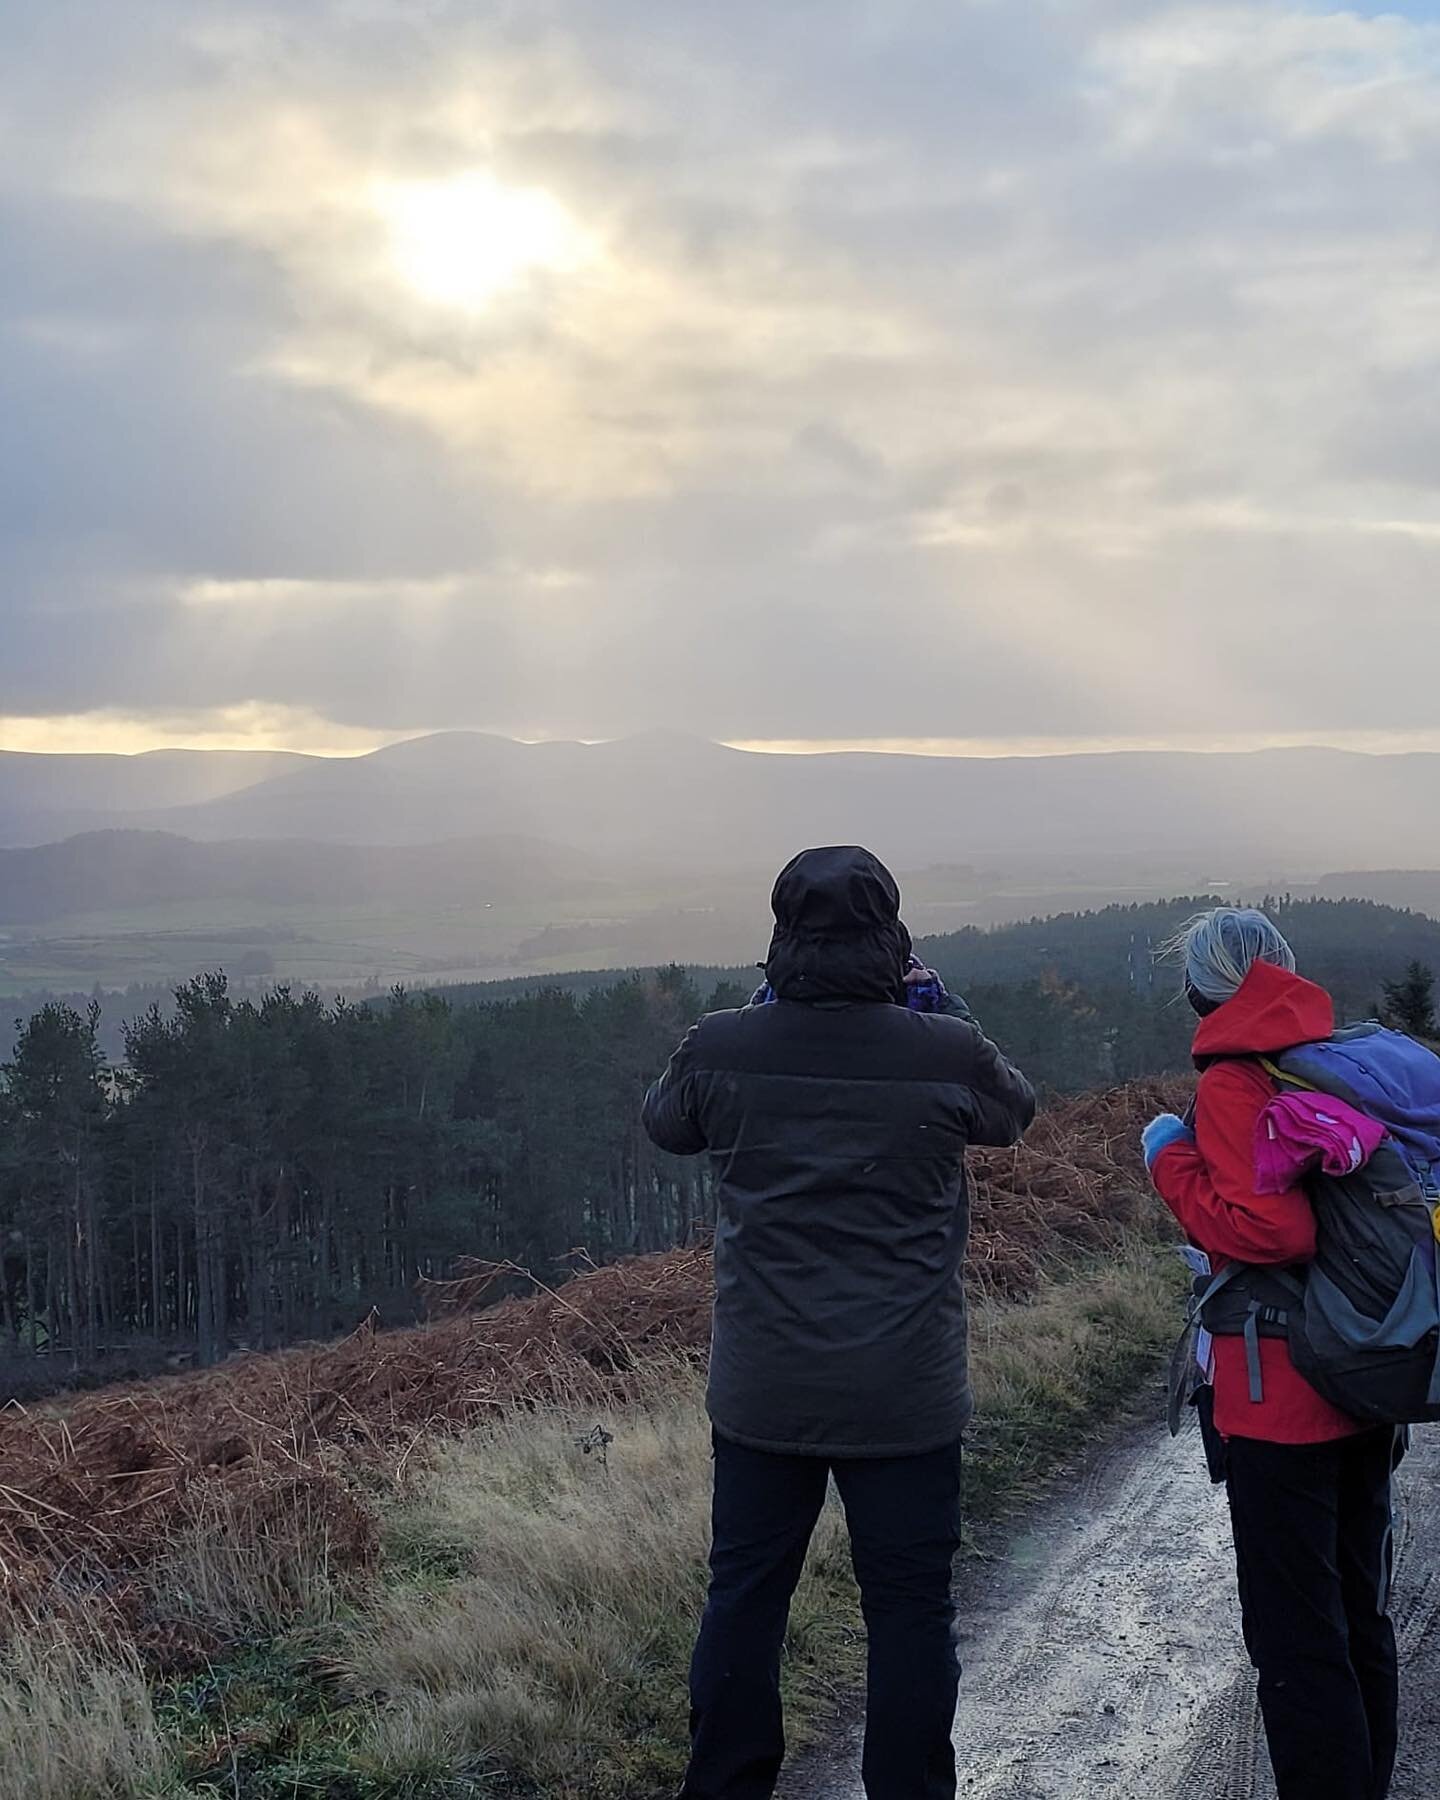 A week in Aberdeenshire with the Mountain to Sea Team. @CreativeAberdeenshire and @LiveLifeAberdeenshire 
@paulandersonfiddler @chrisnangle
 #rememberingtogether #covidmemorial #valleysection #pinktablecloth #aberdeenshirewalks #mountaintosea #longdi